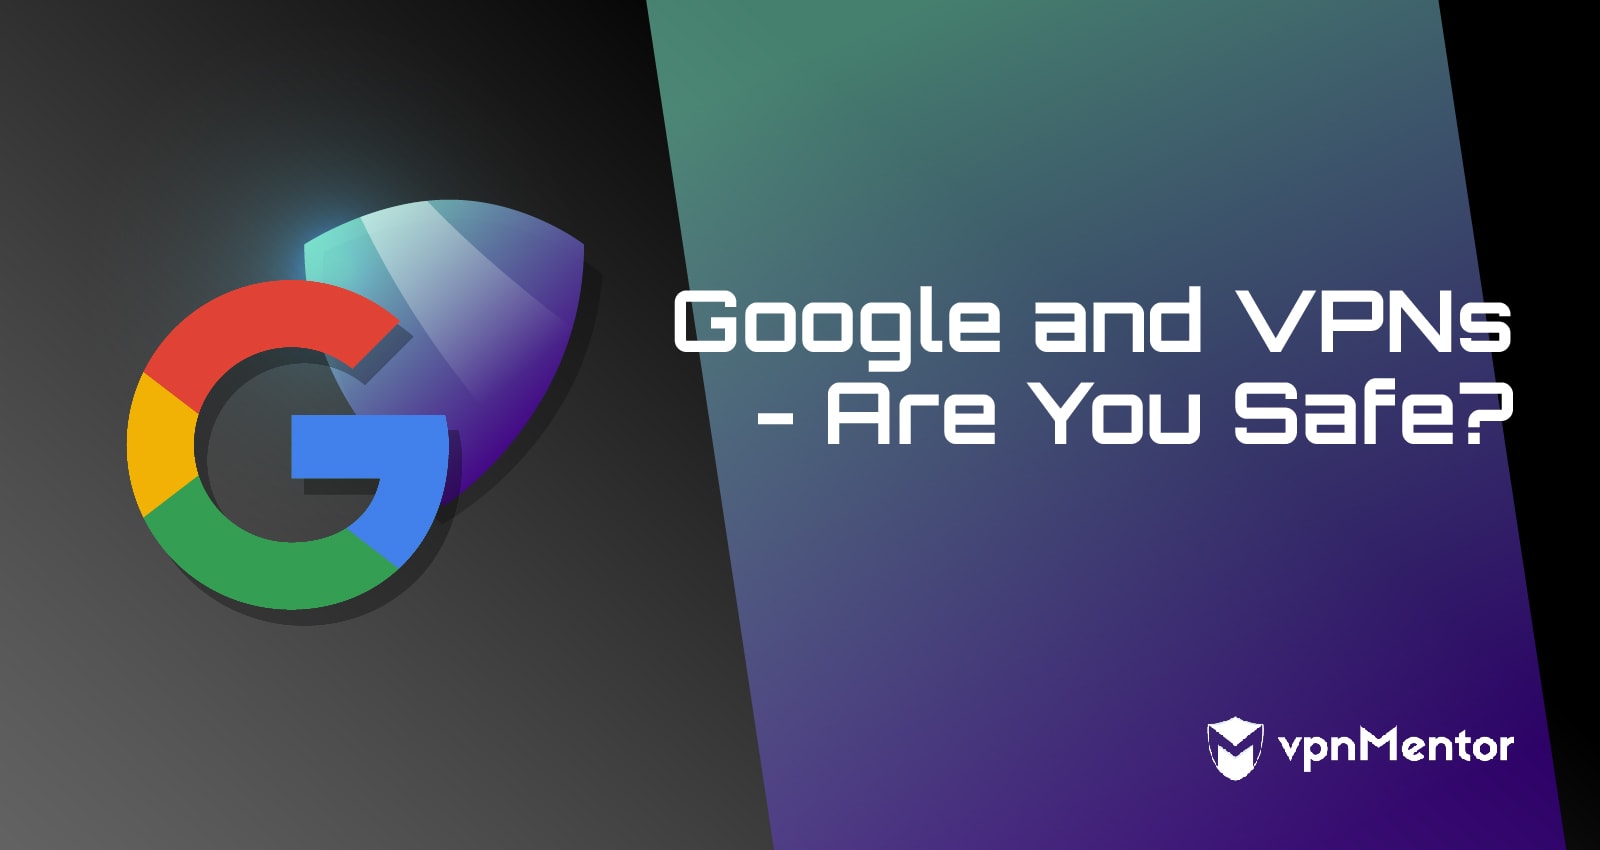 Google and VPNs - Are You Really Safe?